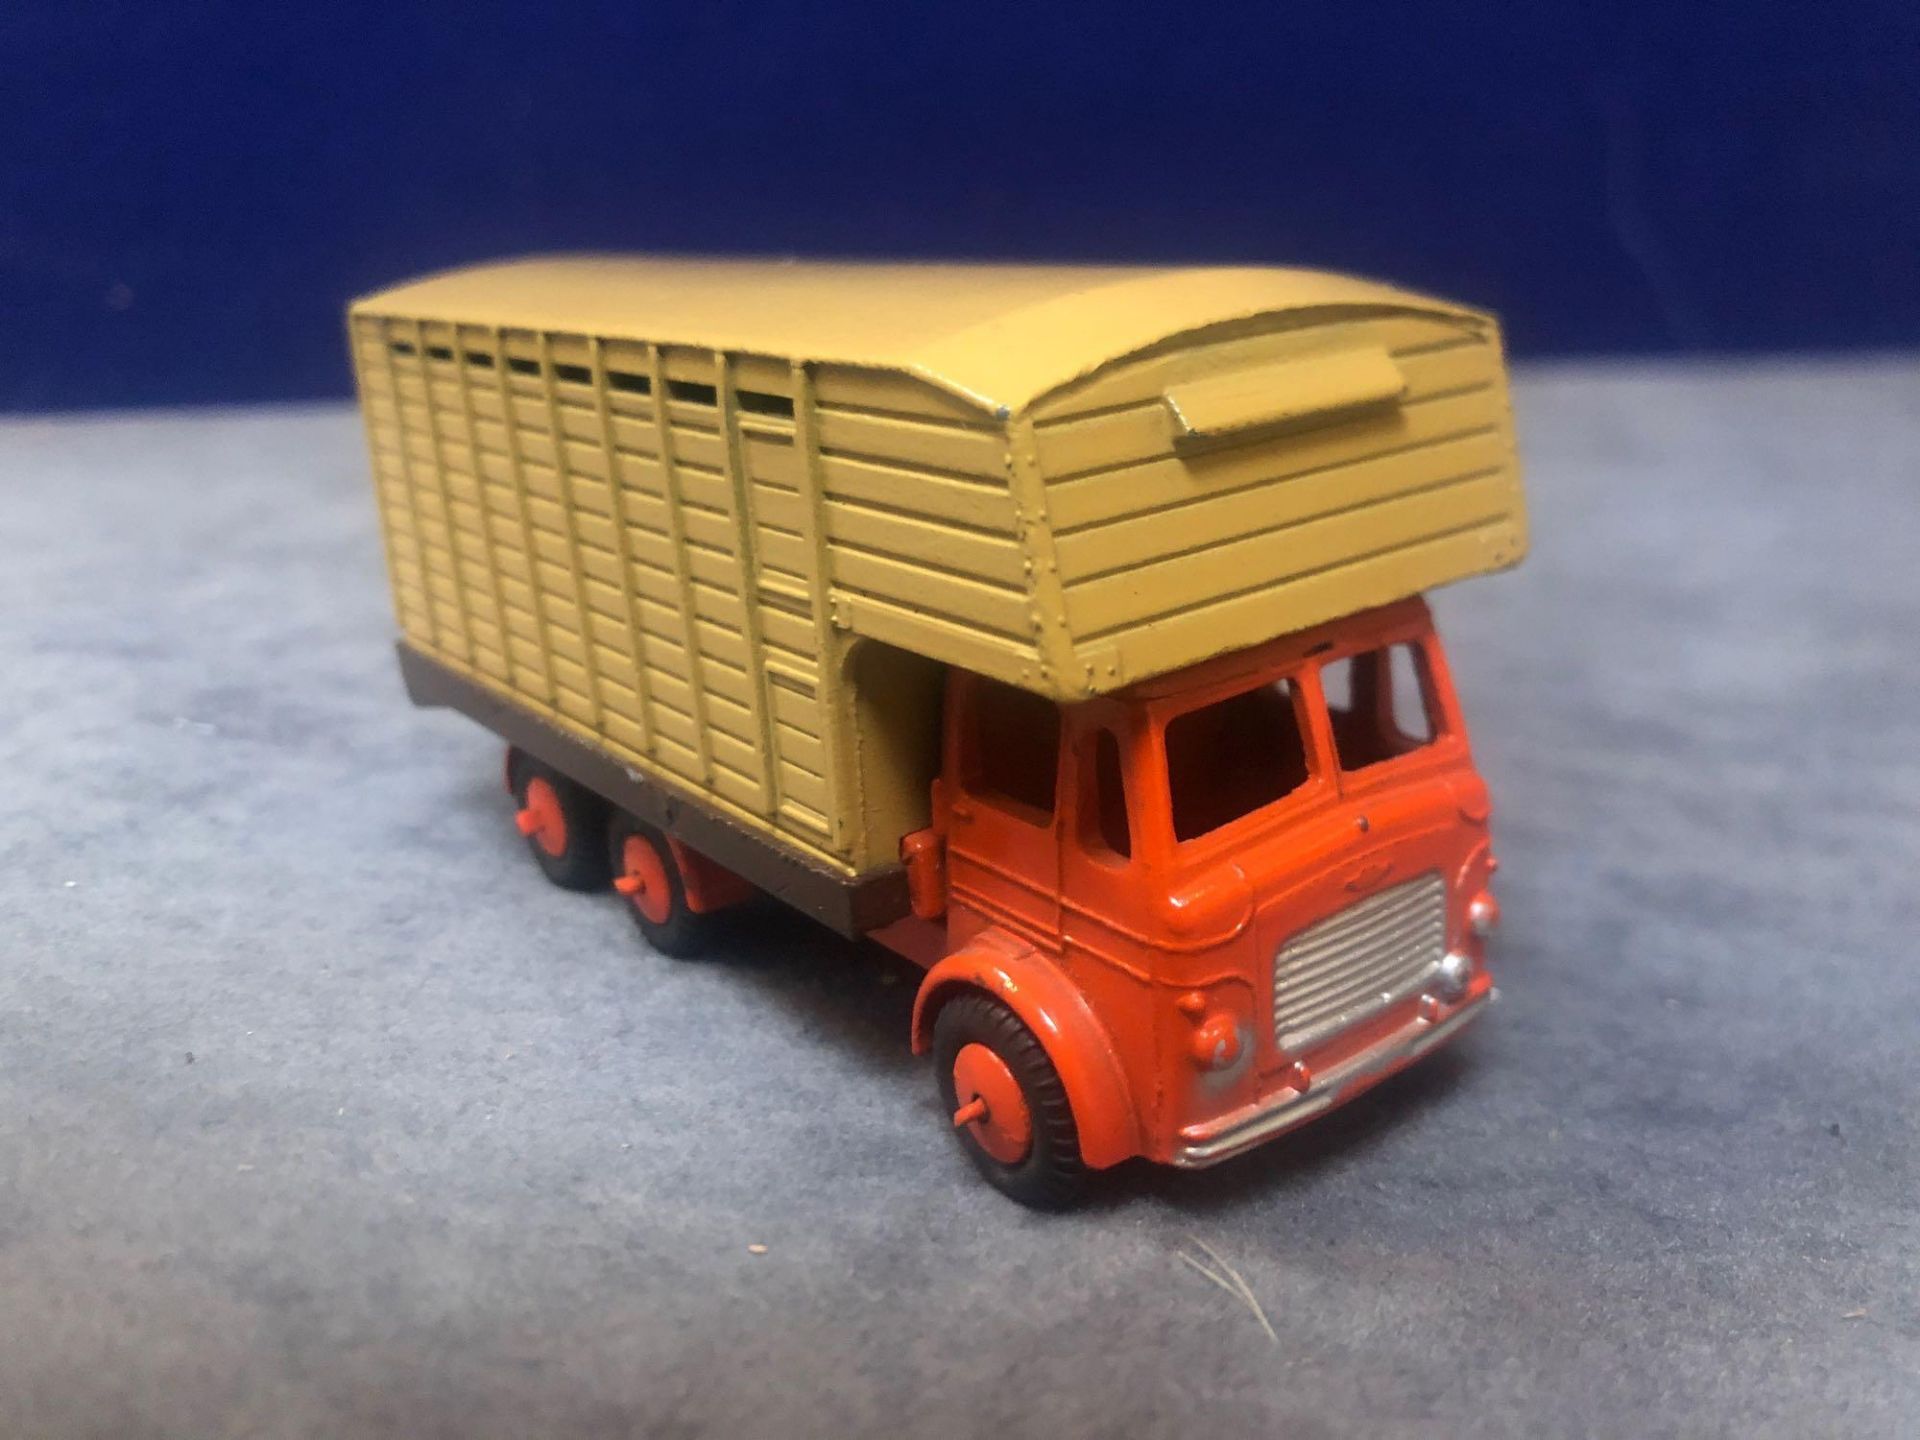 Budgie Toys Rare No.220 Leyland Hippo Cattle Truck Issued 1959-66 Length 97mm Mint Model In Firm Box - Image 2 of 4